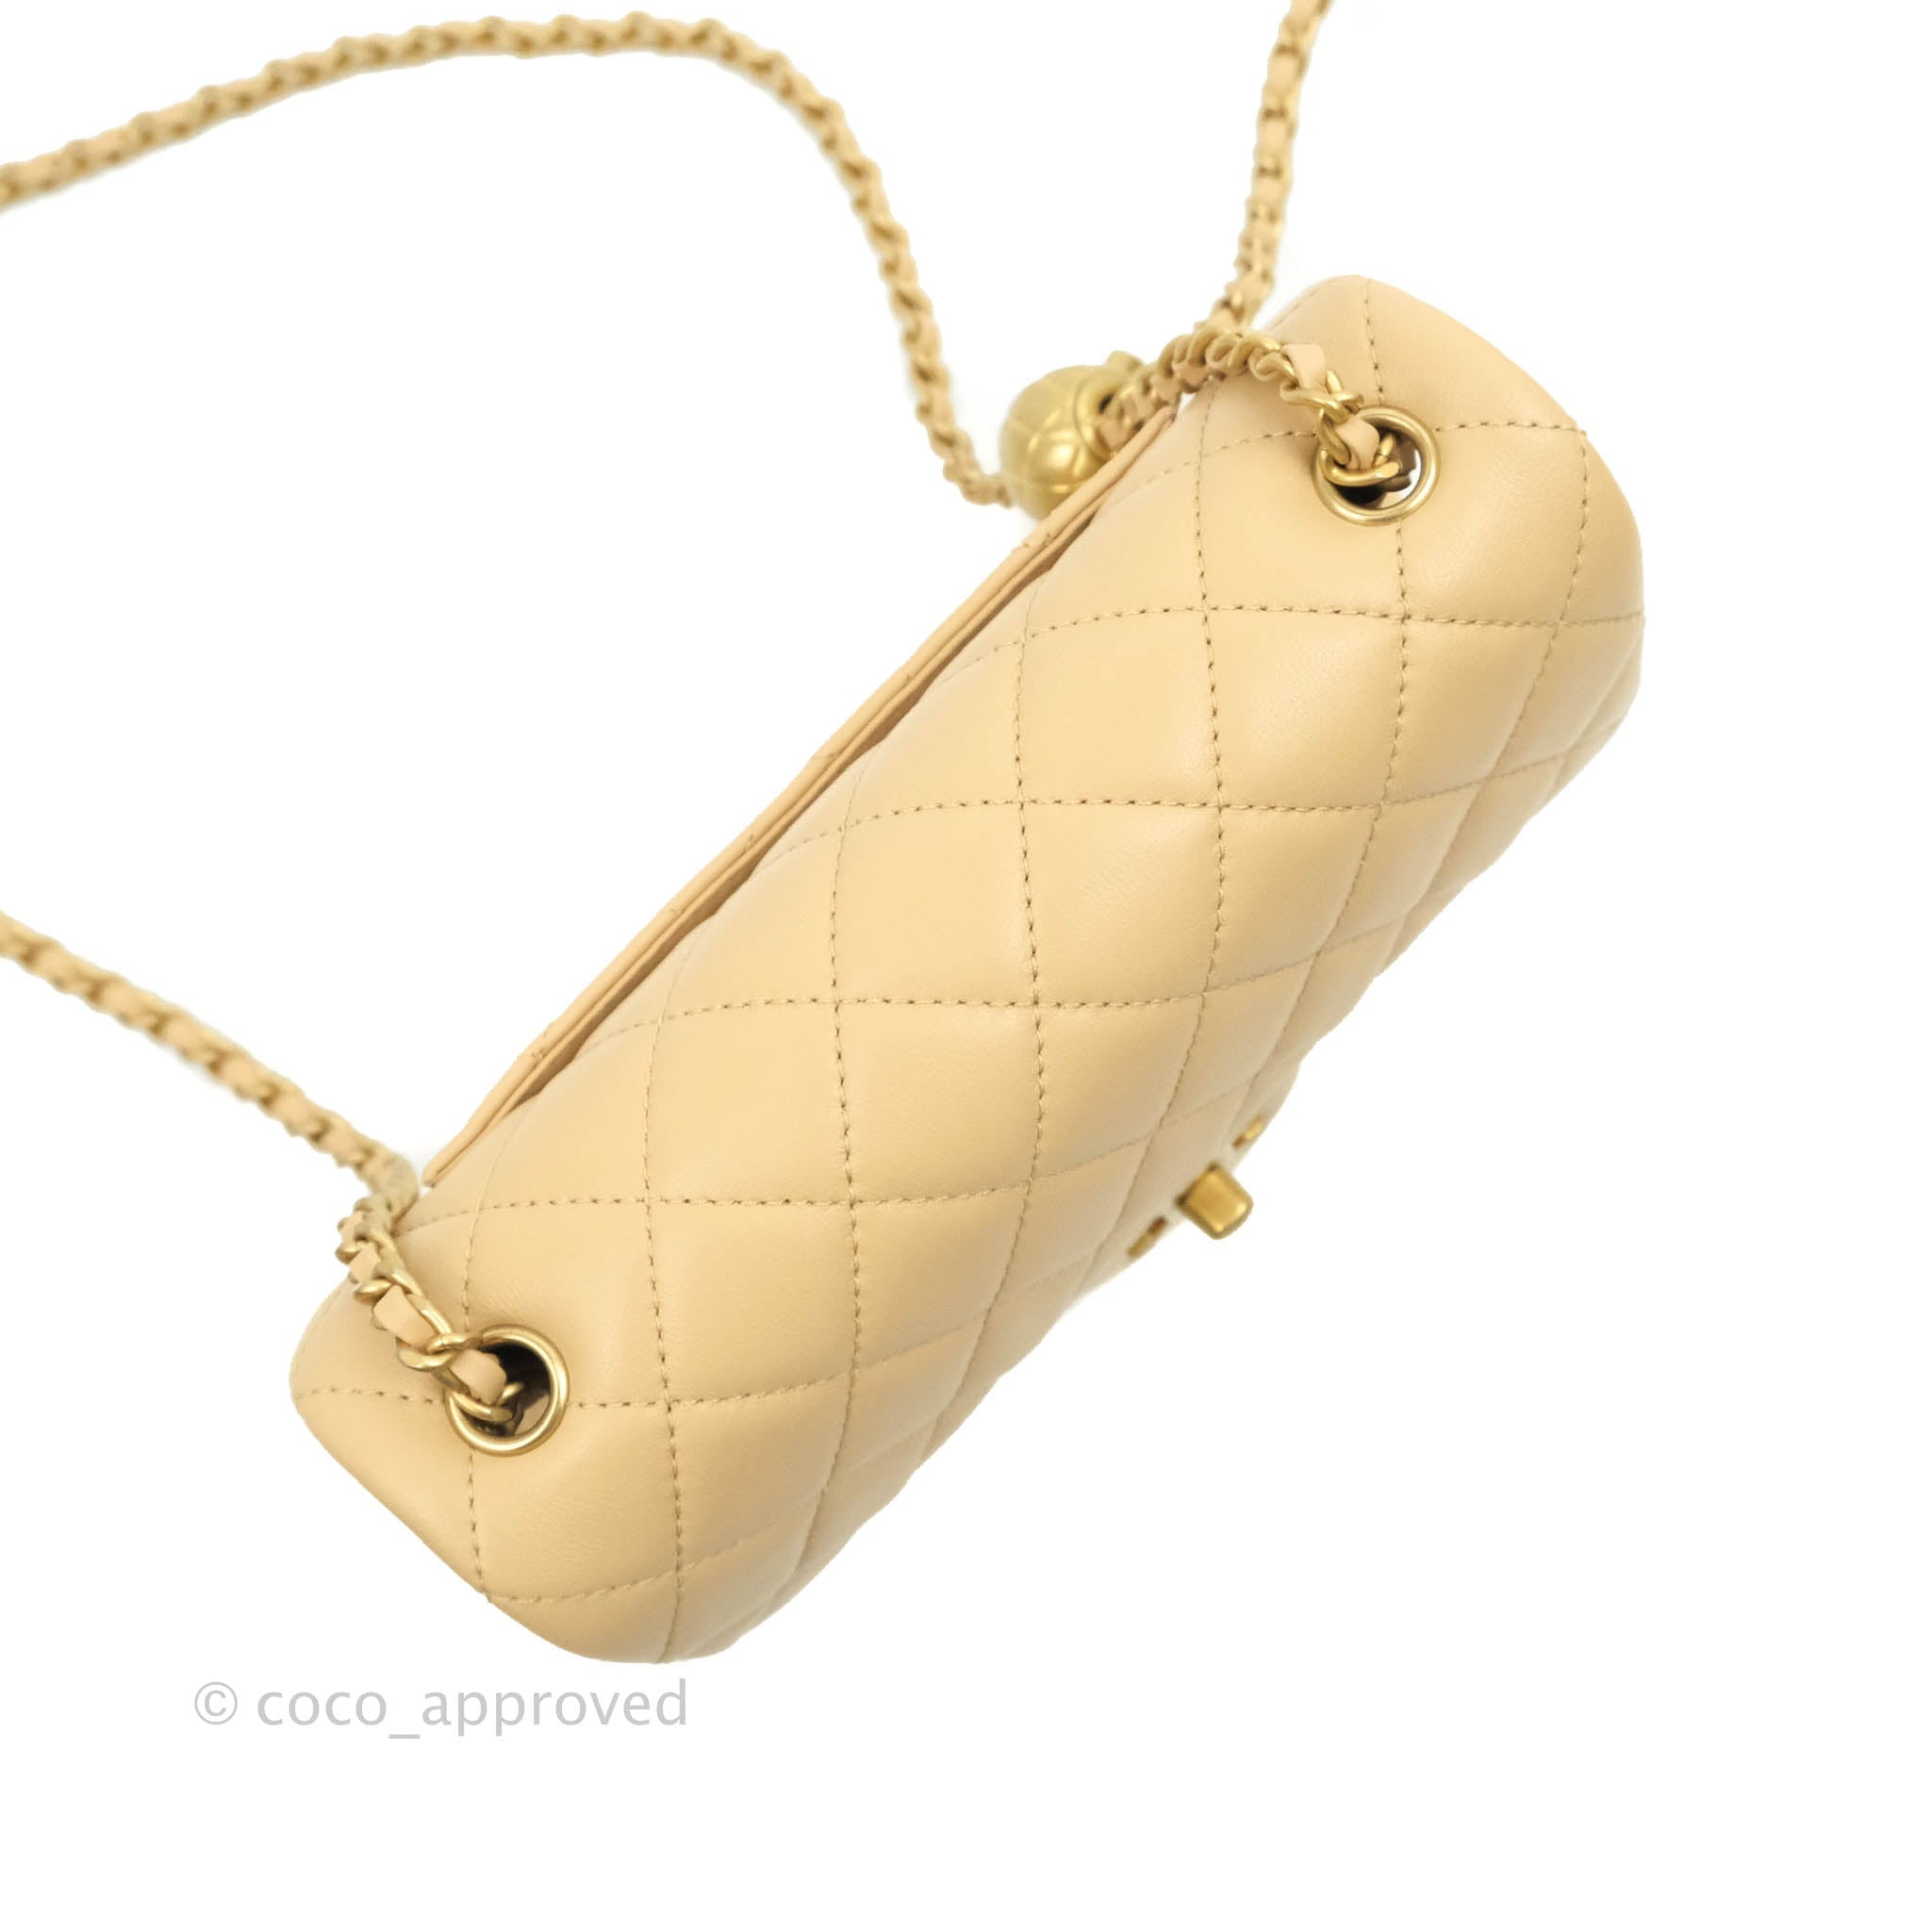 Chanel Gold Quilted Lambskin CC in Love Mini Heart Bag Crossbody 48ck325s